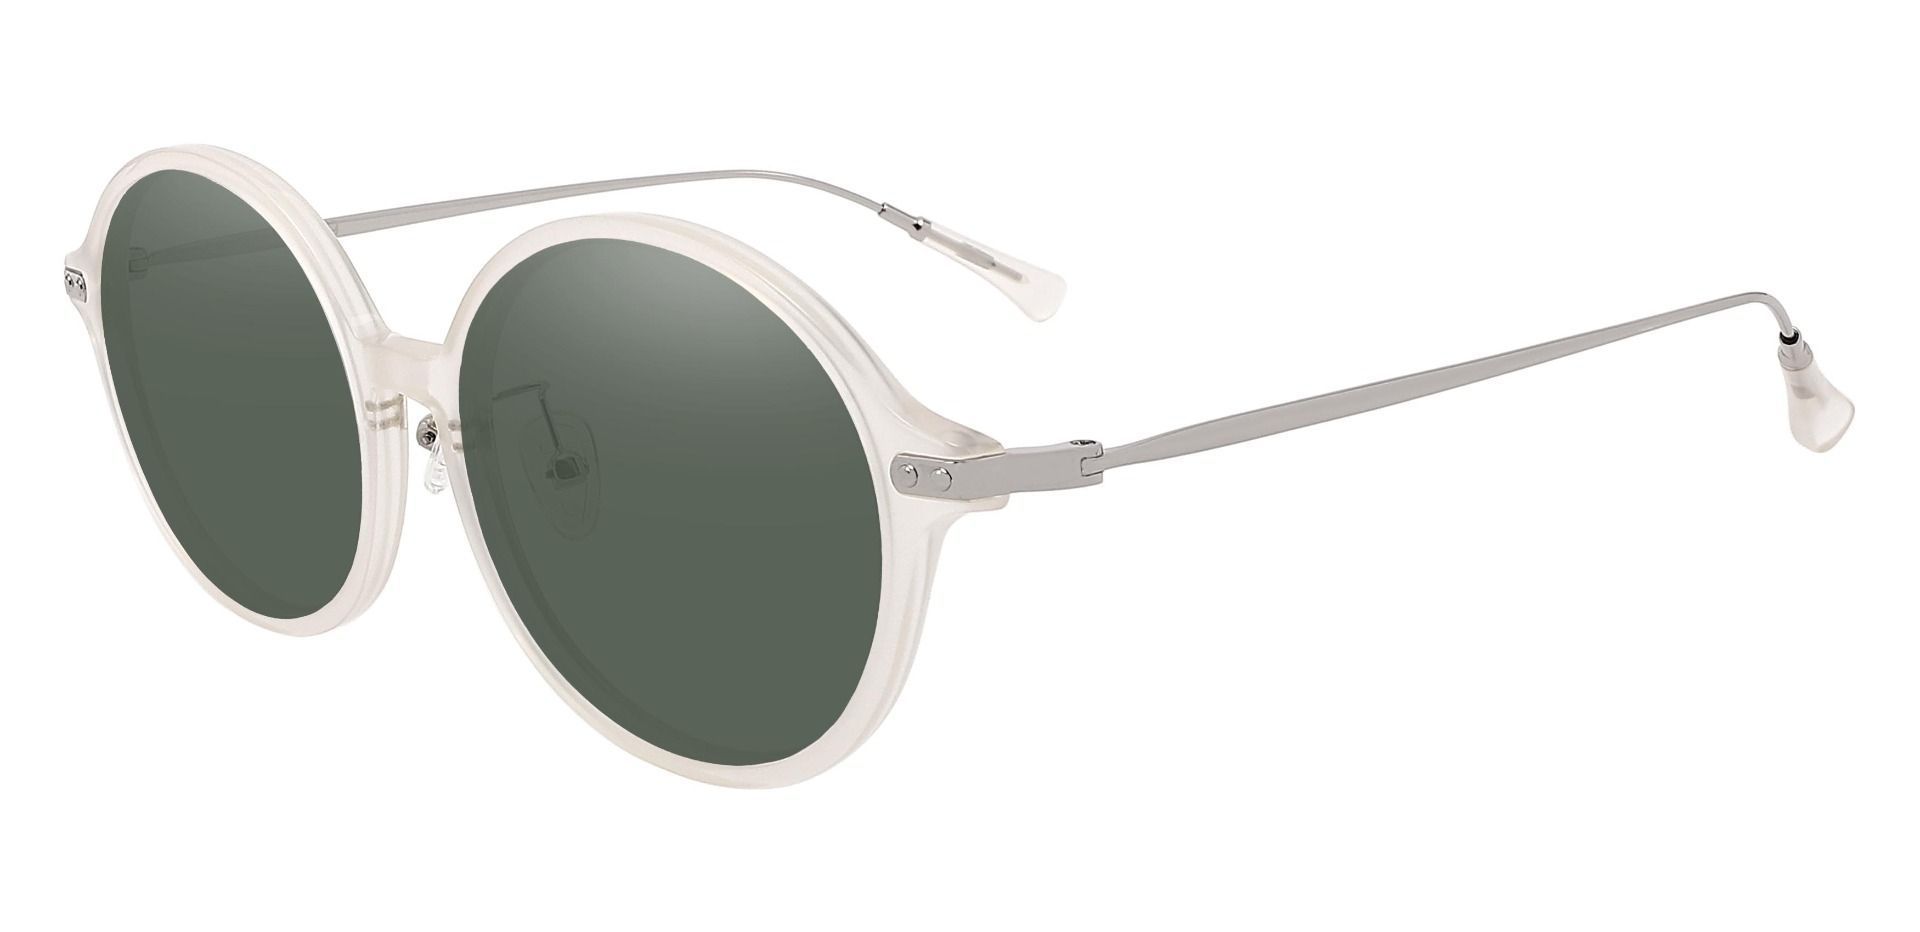 Princeton Round Lined Bifocal Sunglasses - Clear Frame With Green Lenses